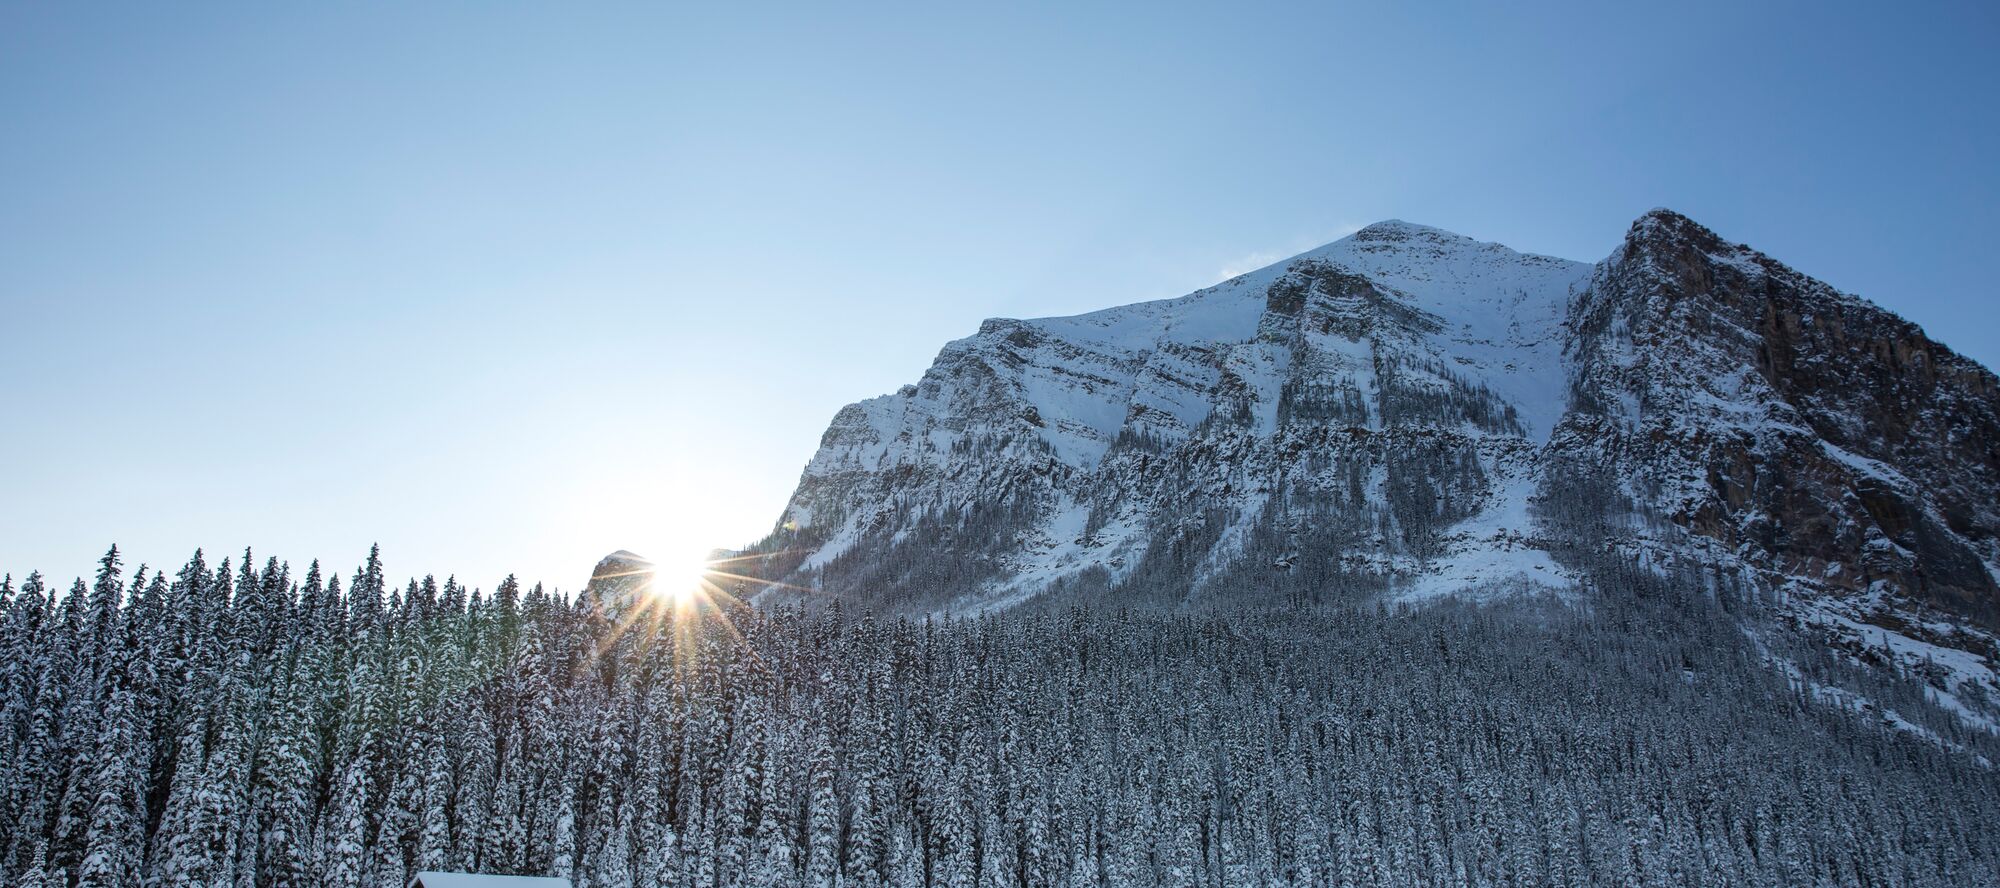 A couple walking by Lake Louise backdropped by mountains and trees on a winter day.